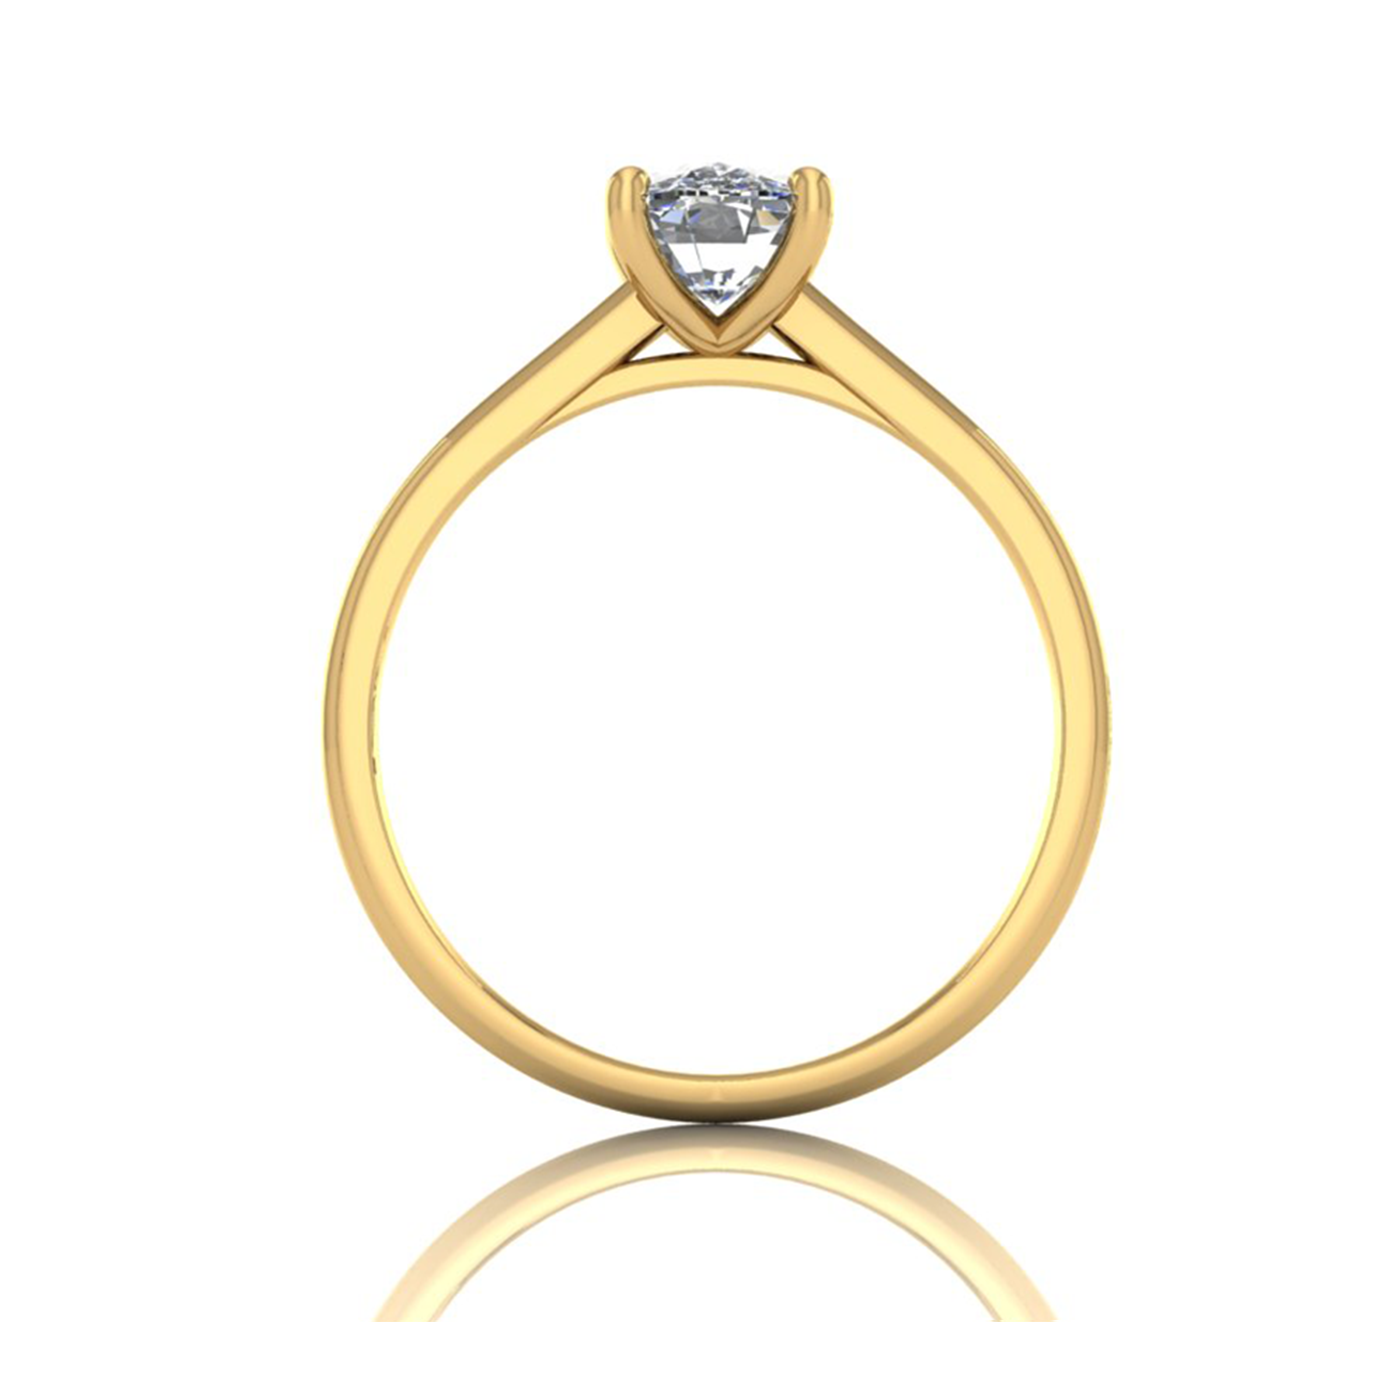 18k yellow gold  1.50 ct 4 prongs solitaire elongated cushion cut diamond engagement ring with whisper thin band